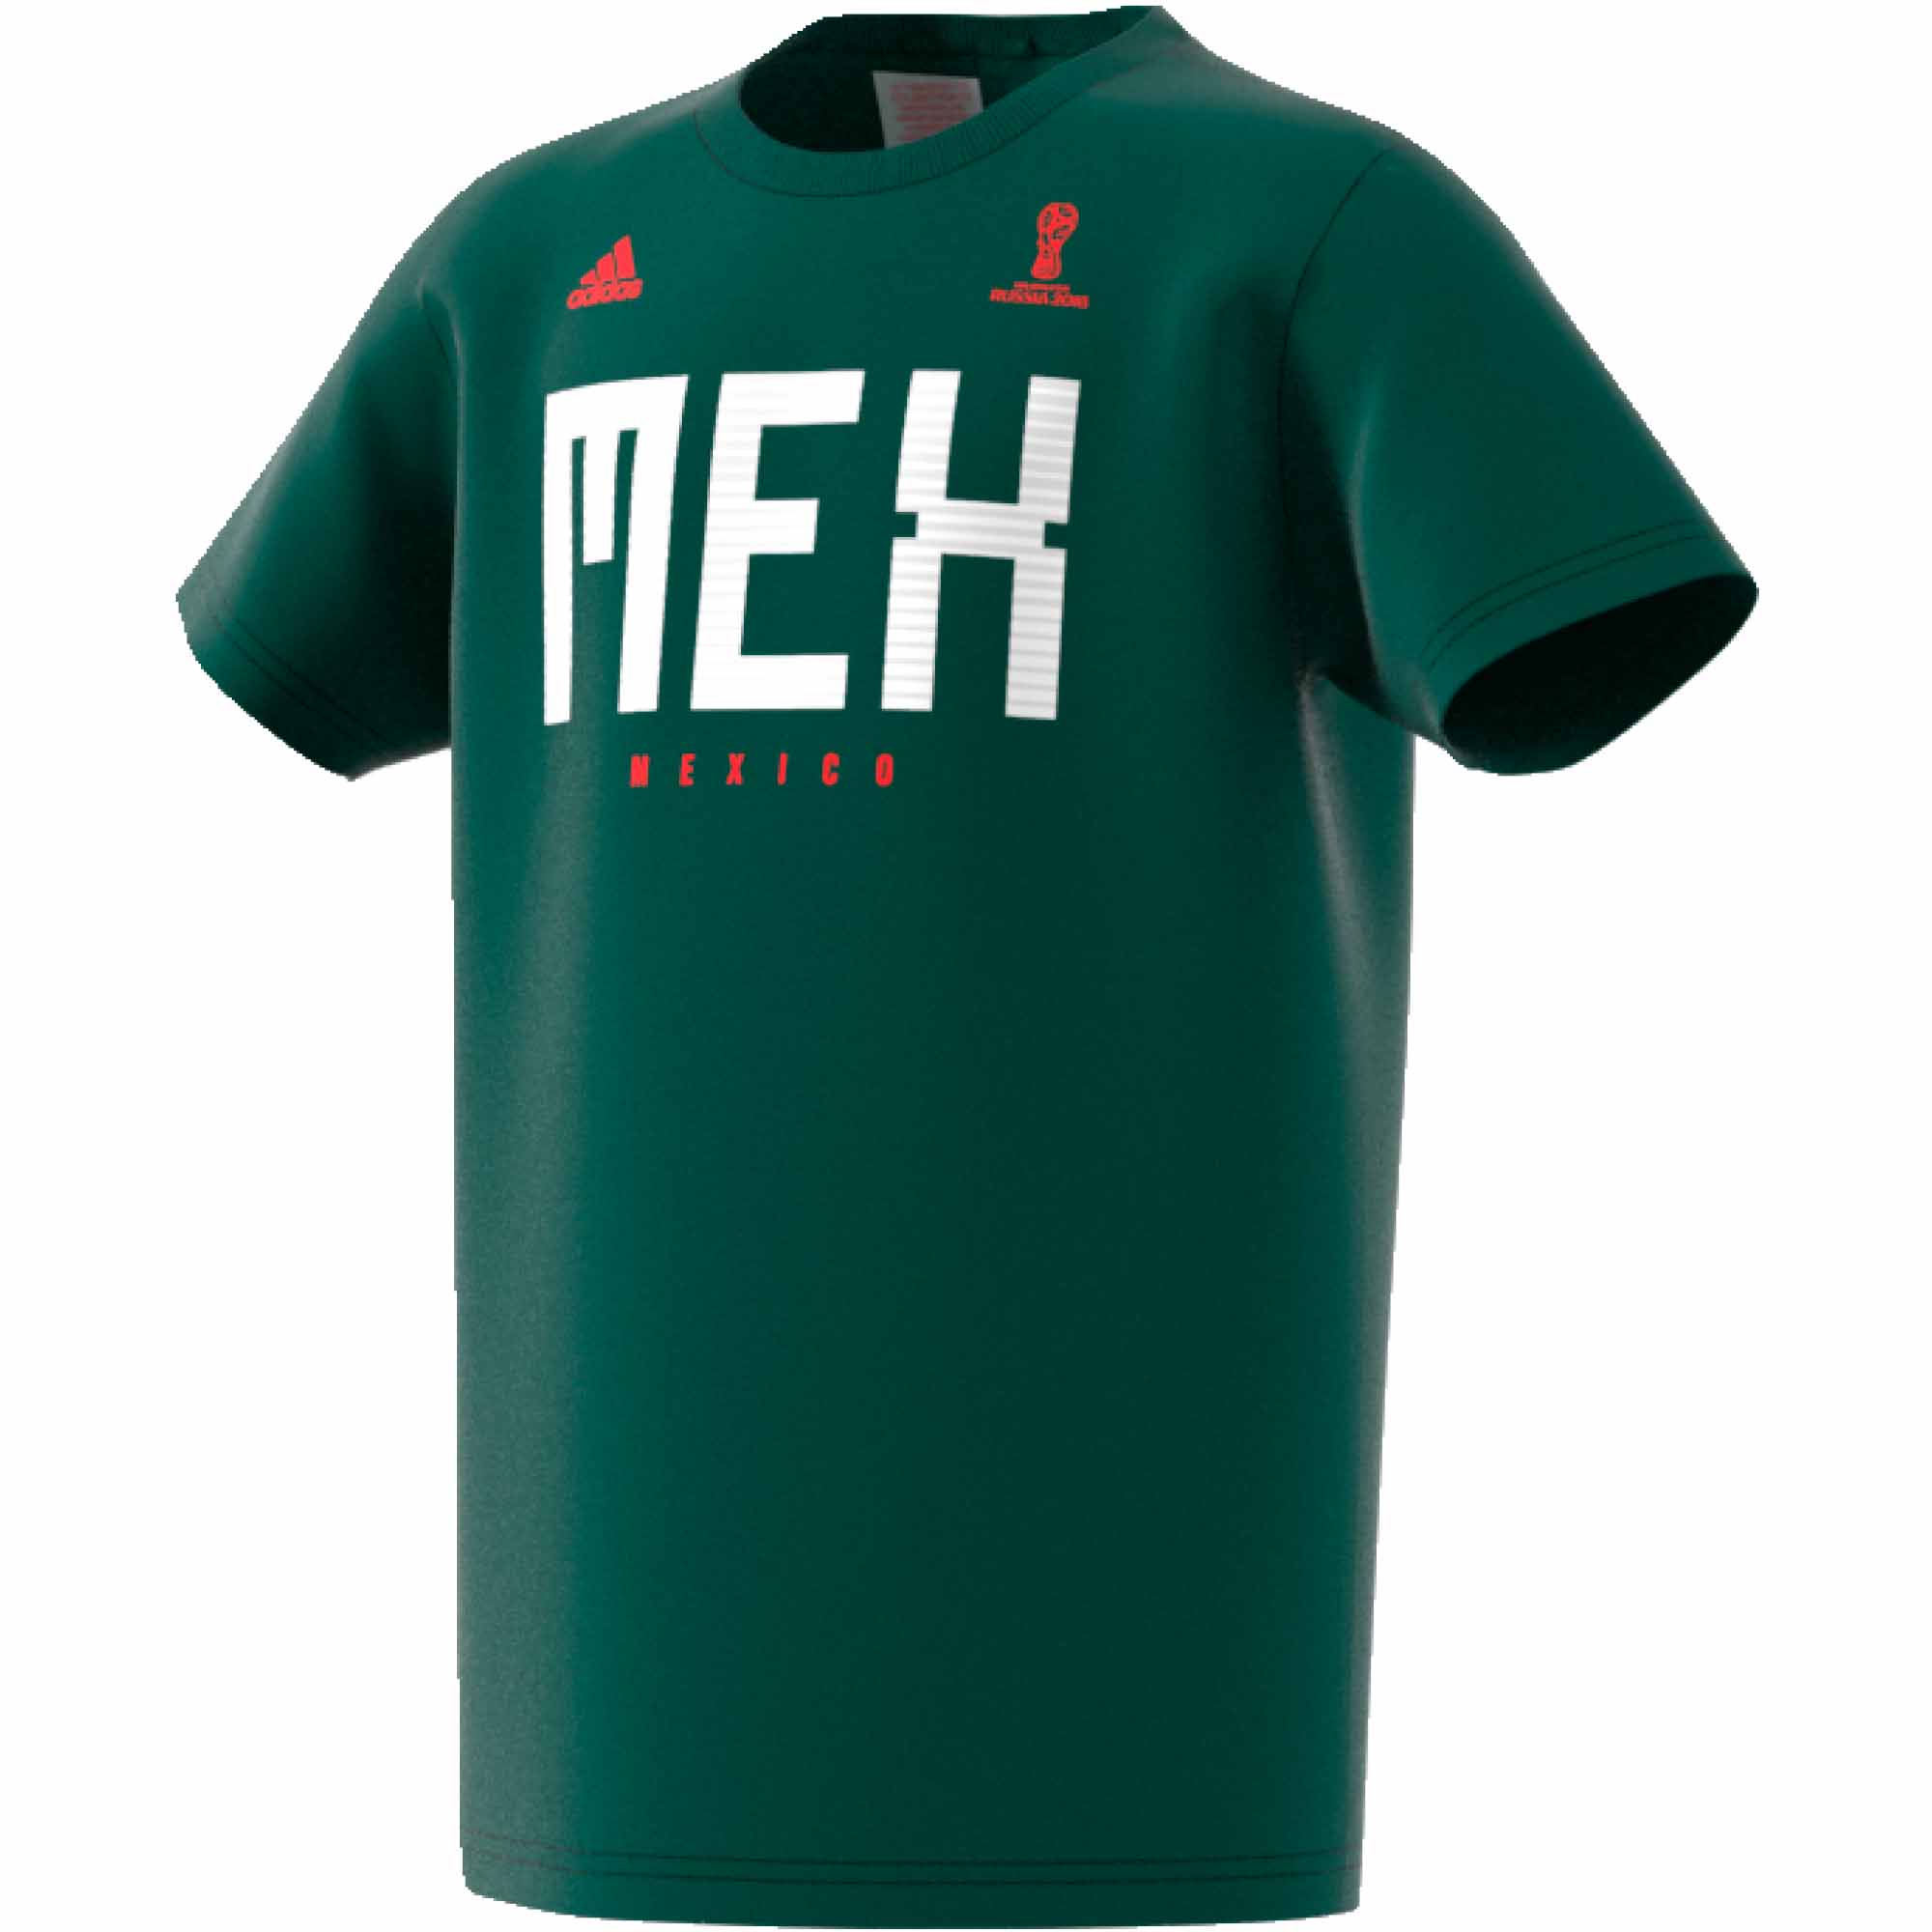 mexico youth jersey